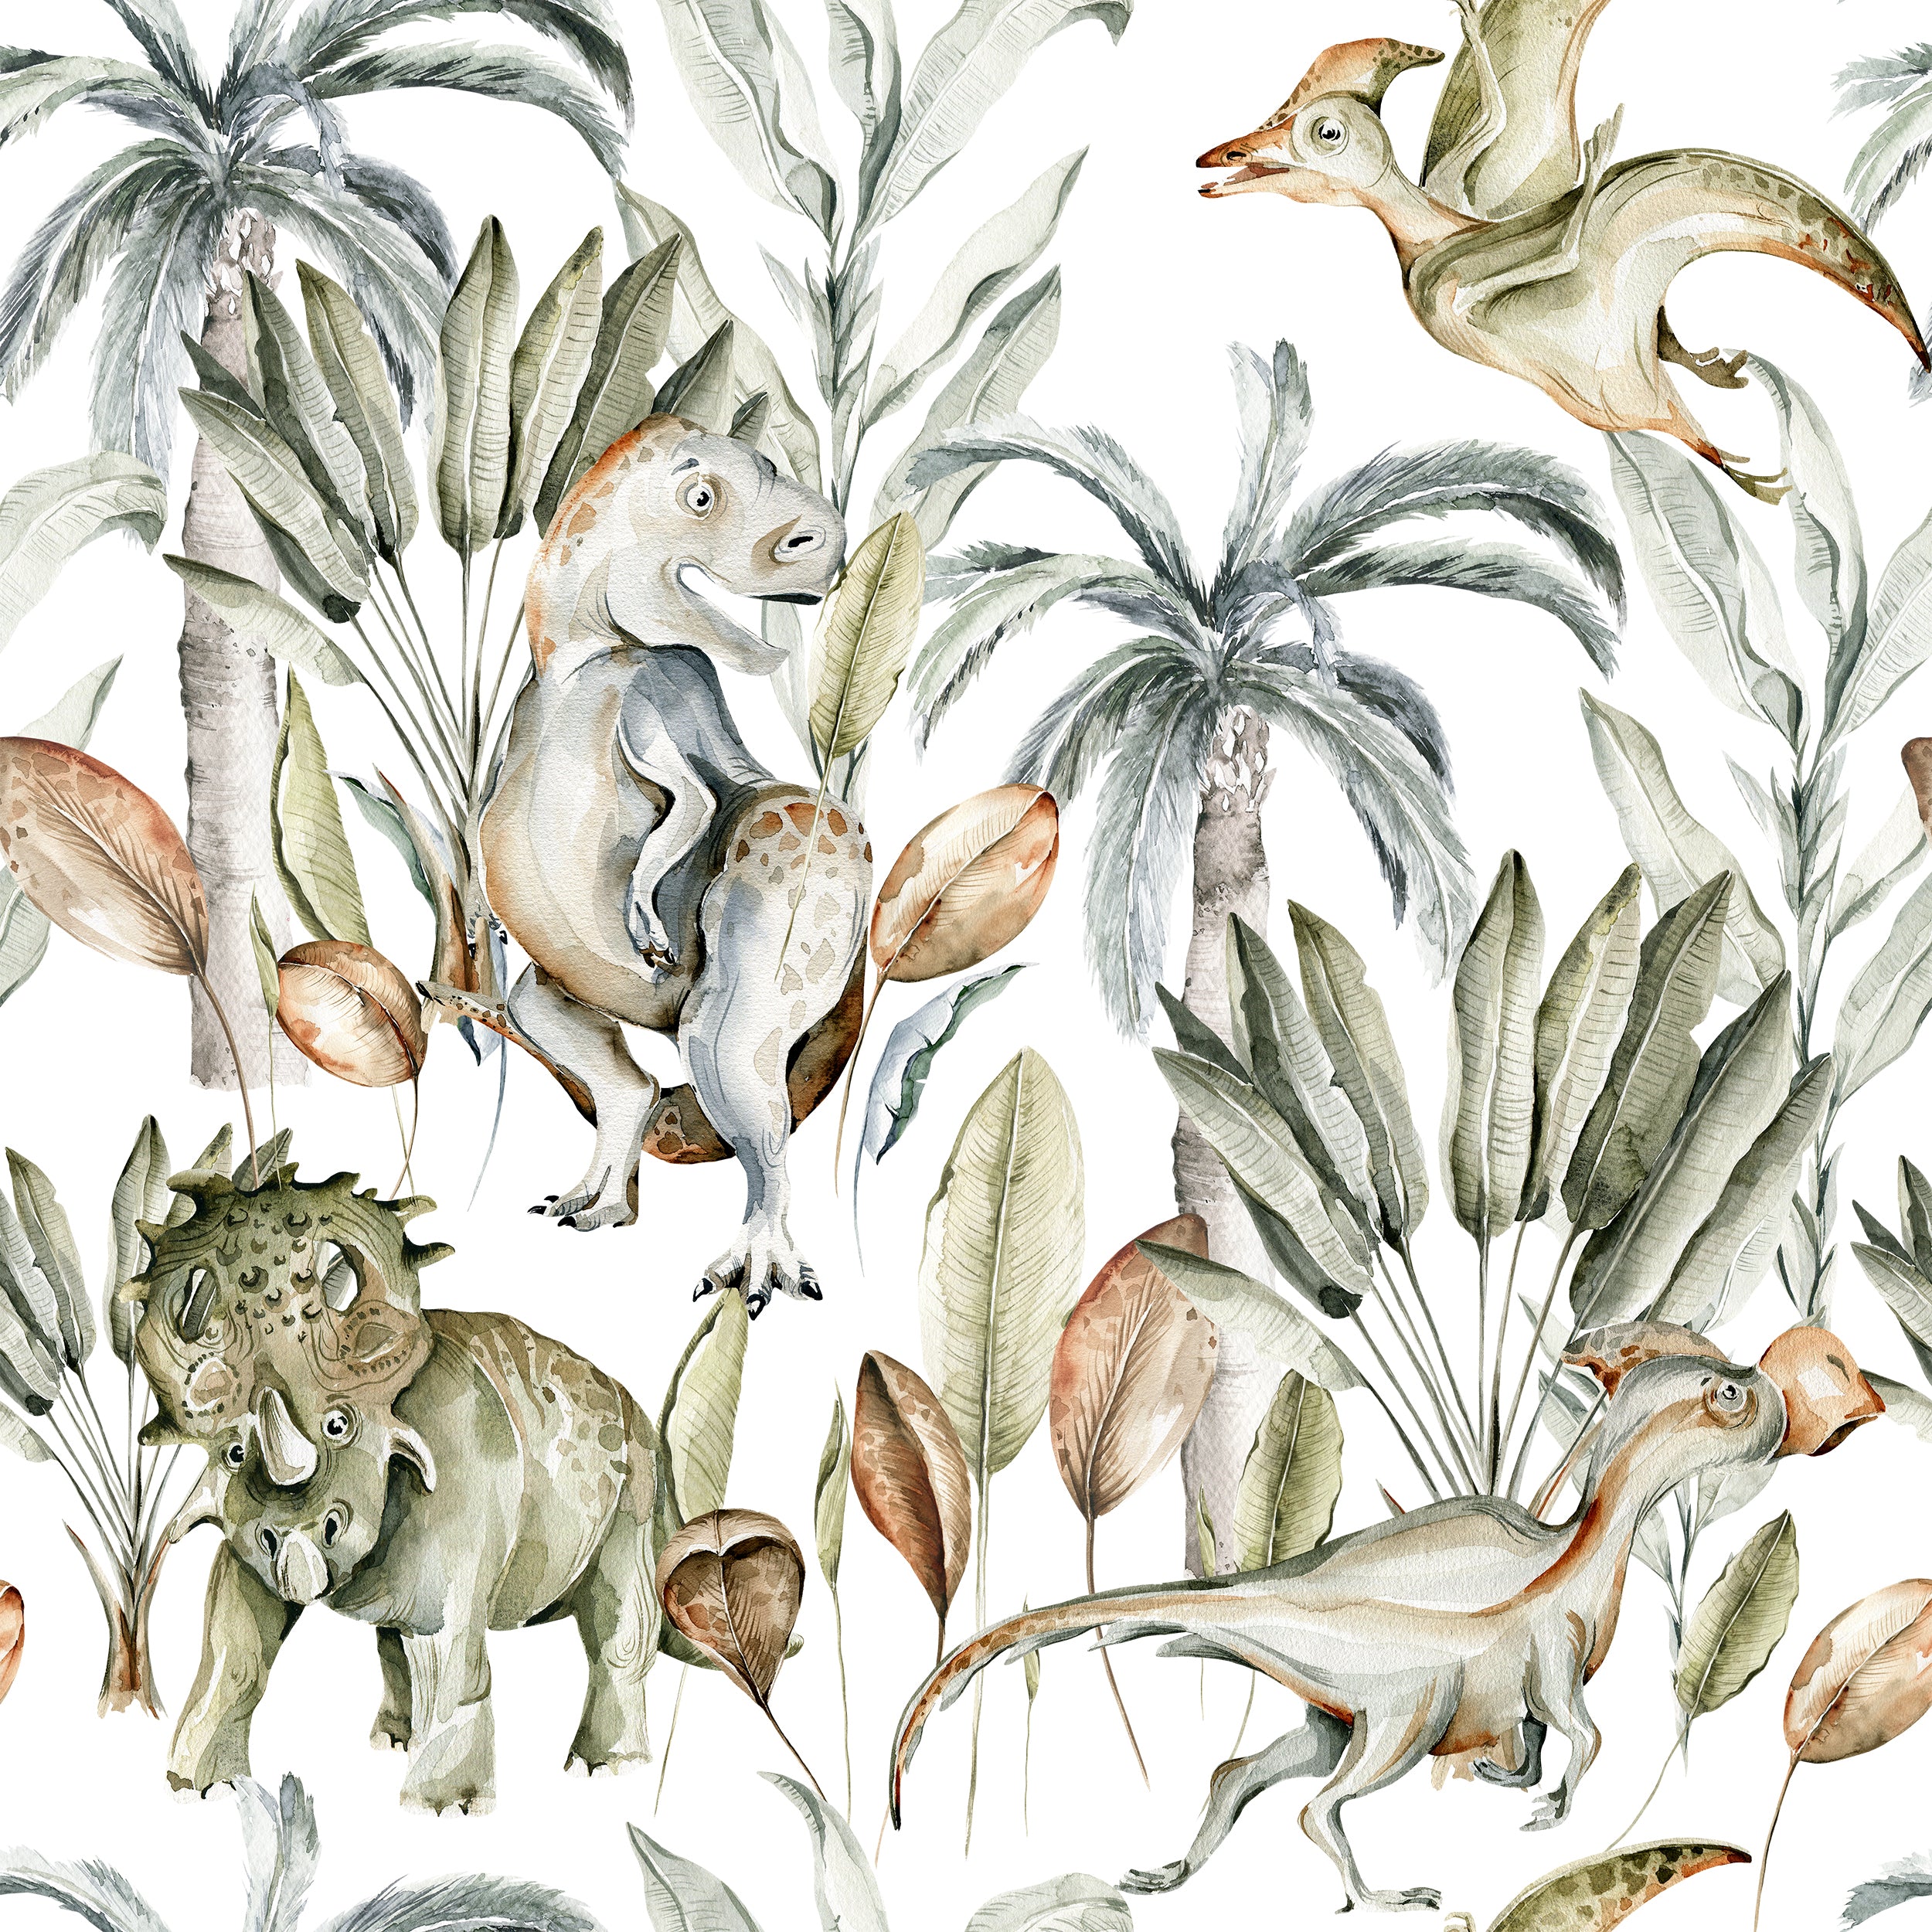 The Watercolour Dino Wallpaper features a whimsical pattern of watercolor dinosaurs, including a smiling Iguanodon and a playful Pterodactyl, among lush tropical foliage and scattered seeds, rendered in soft hues to create a prehistoric jungle scene.